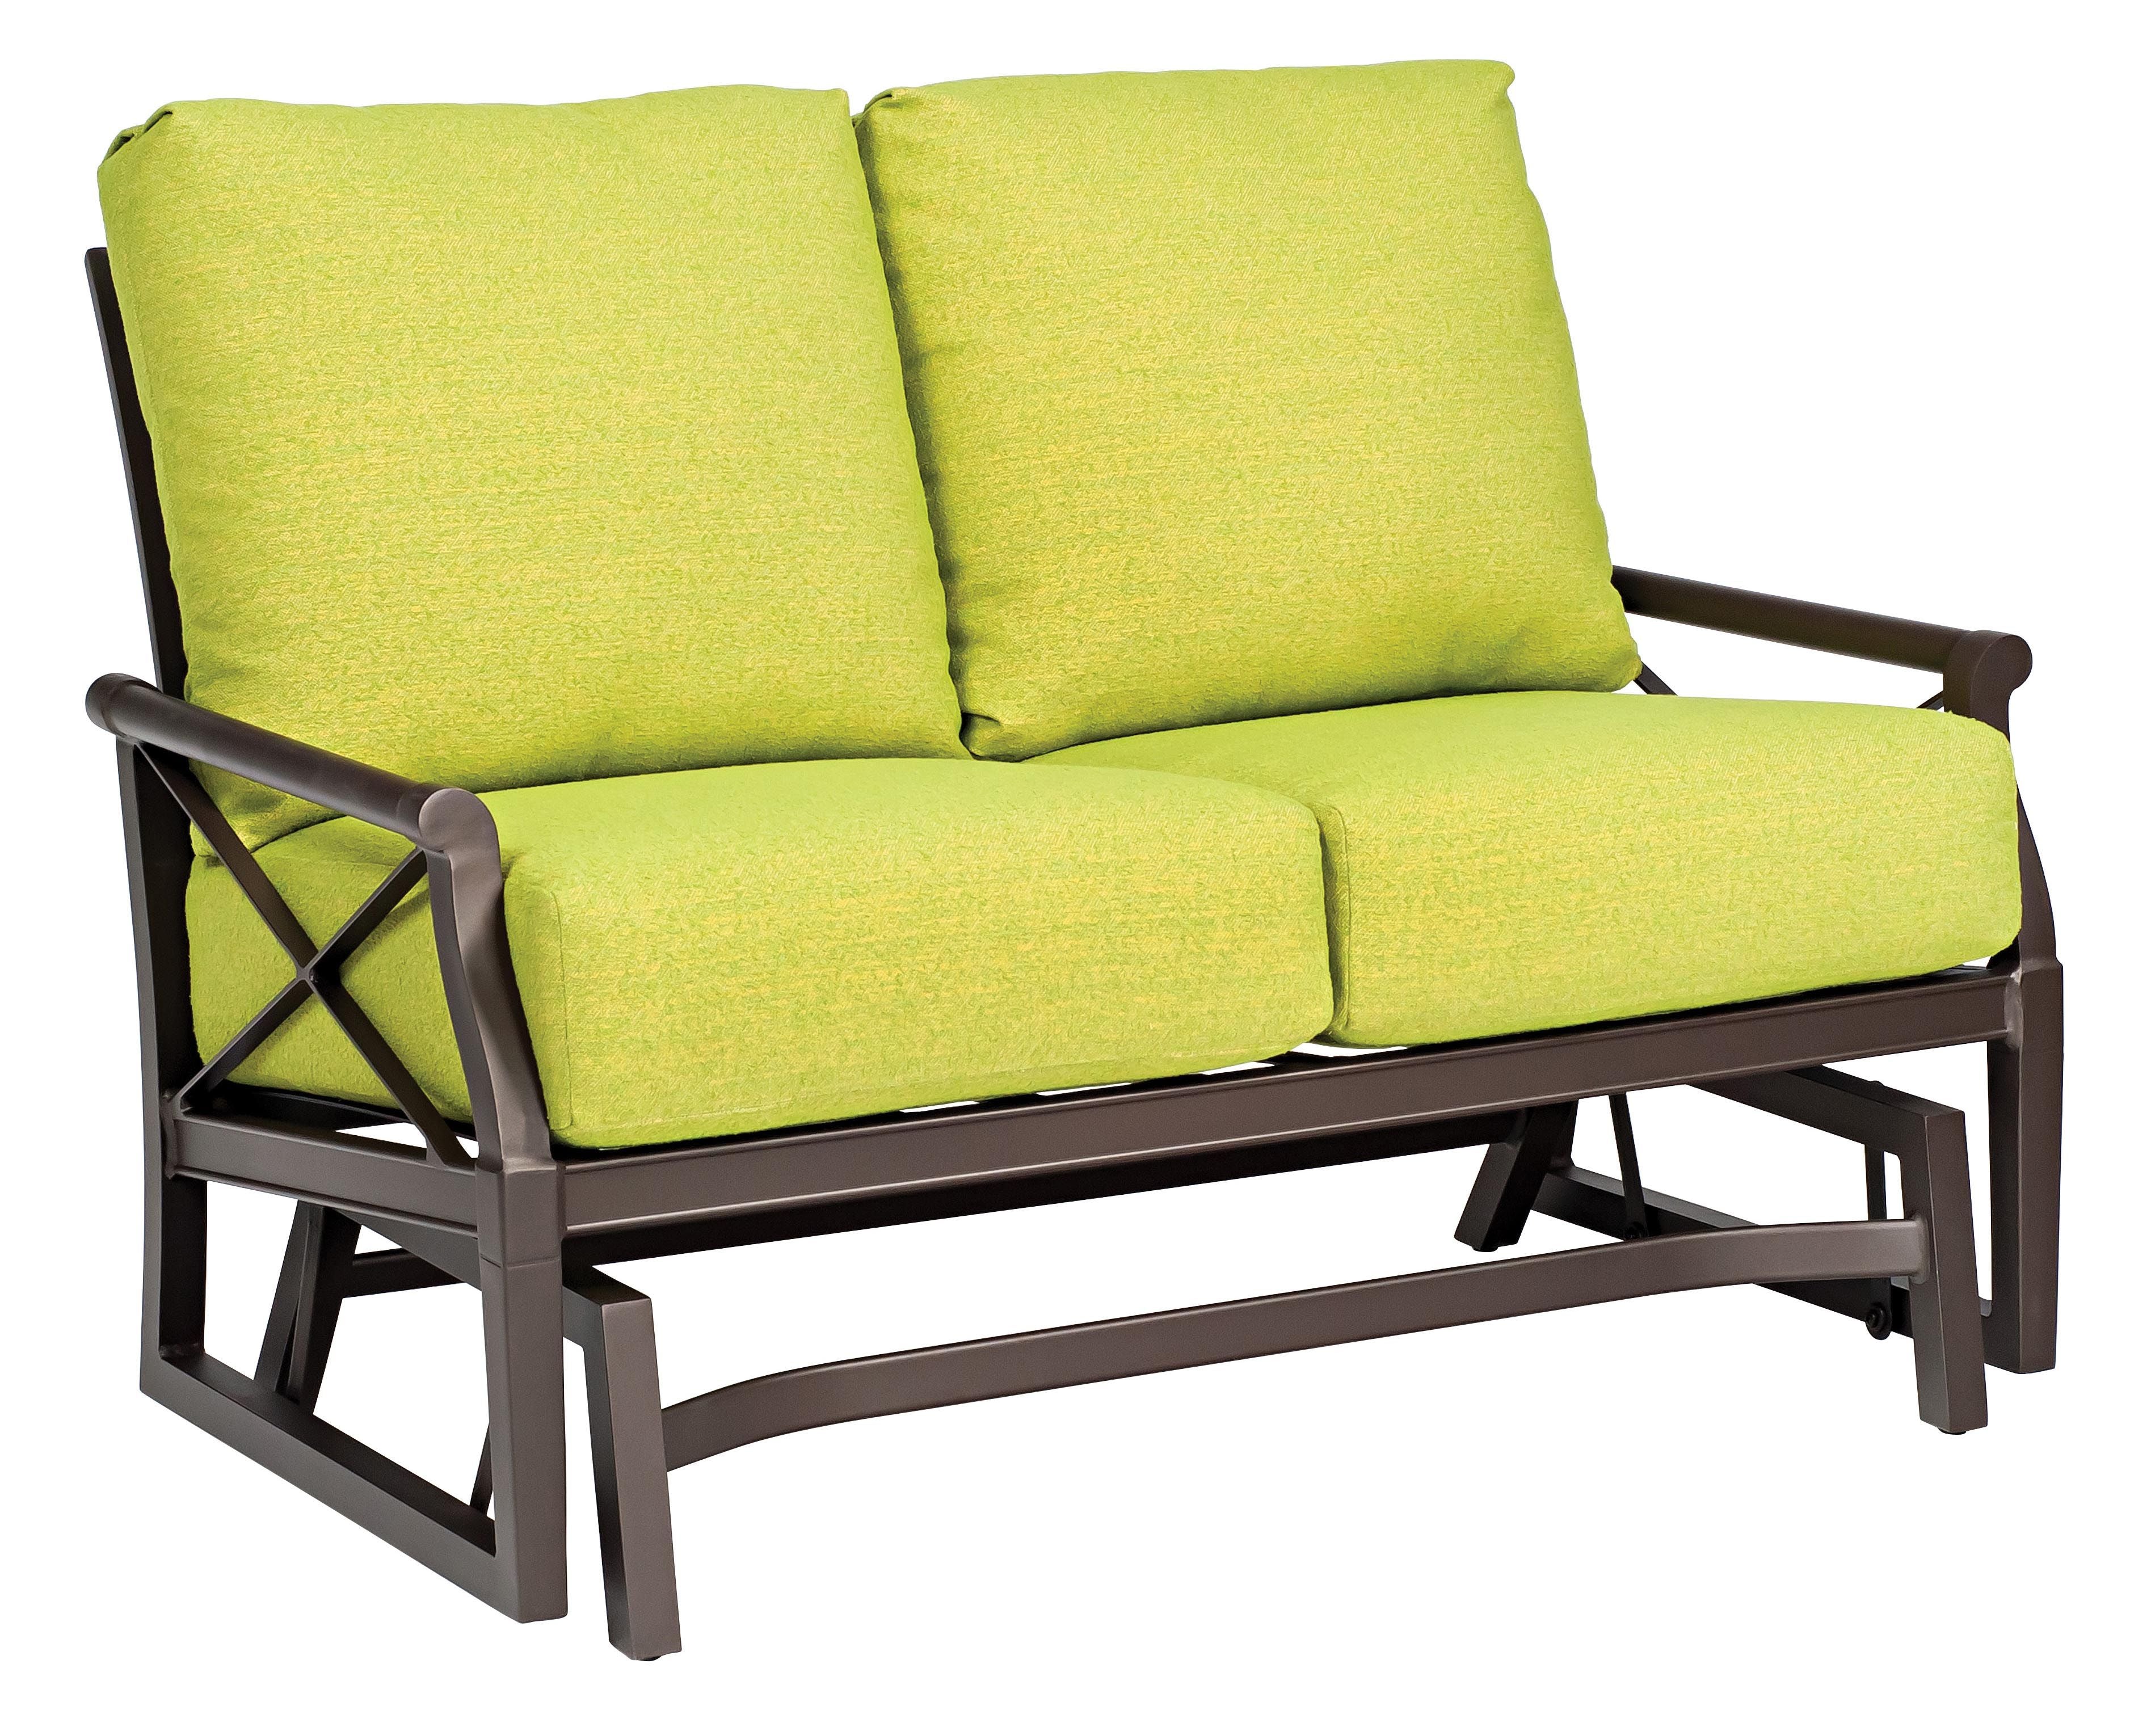 Andover Gliding Love Seat by Woodard